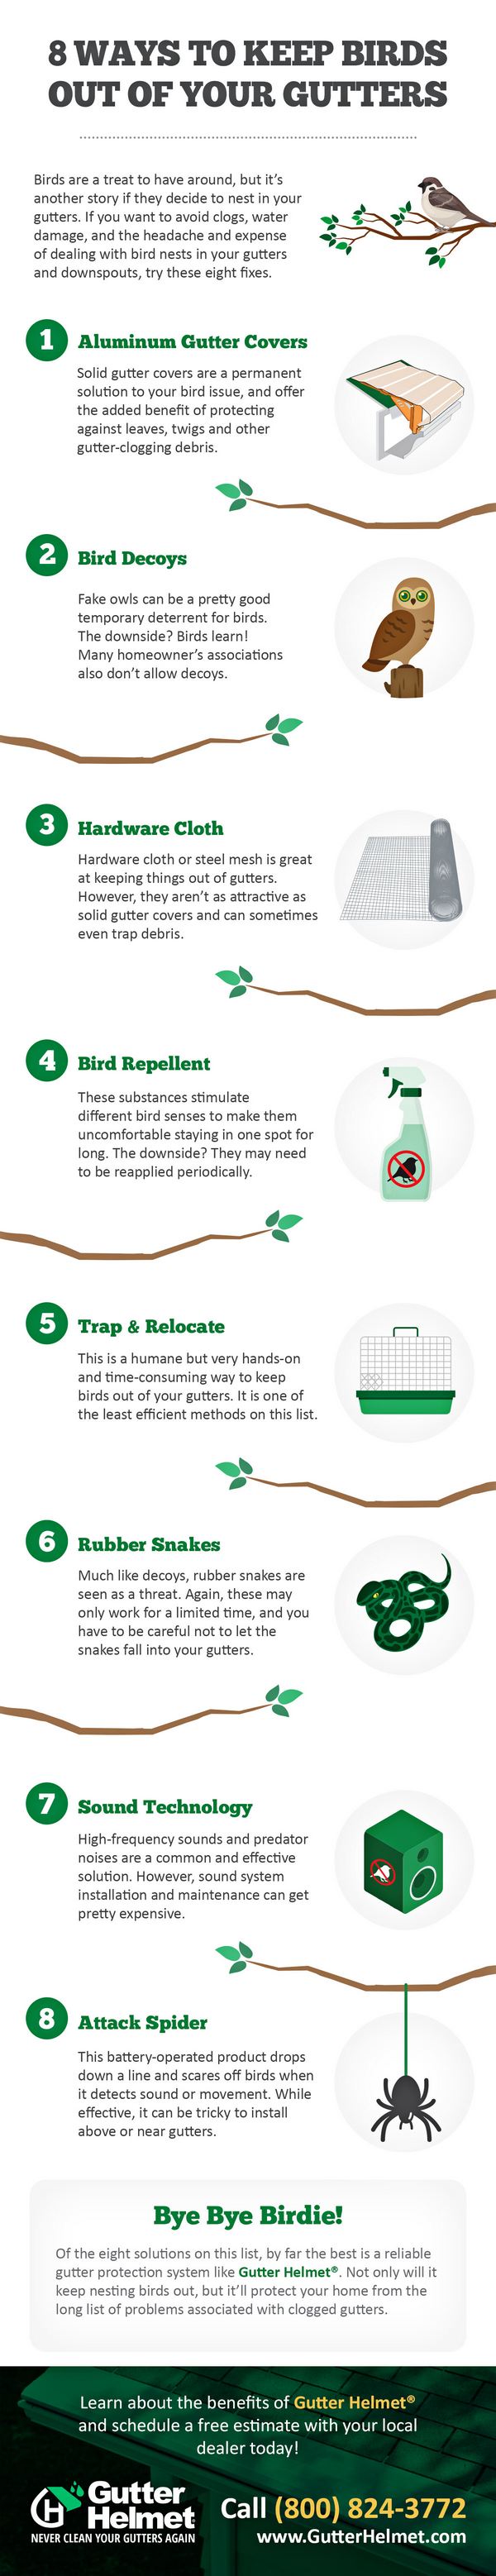 8 Ways To Keep Birds Out Of Your Gutters